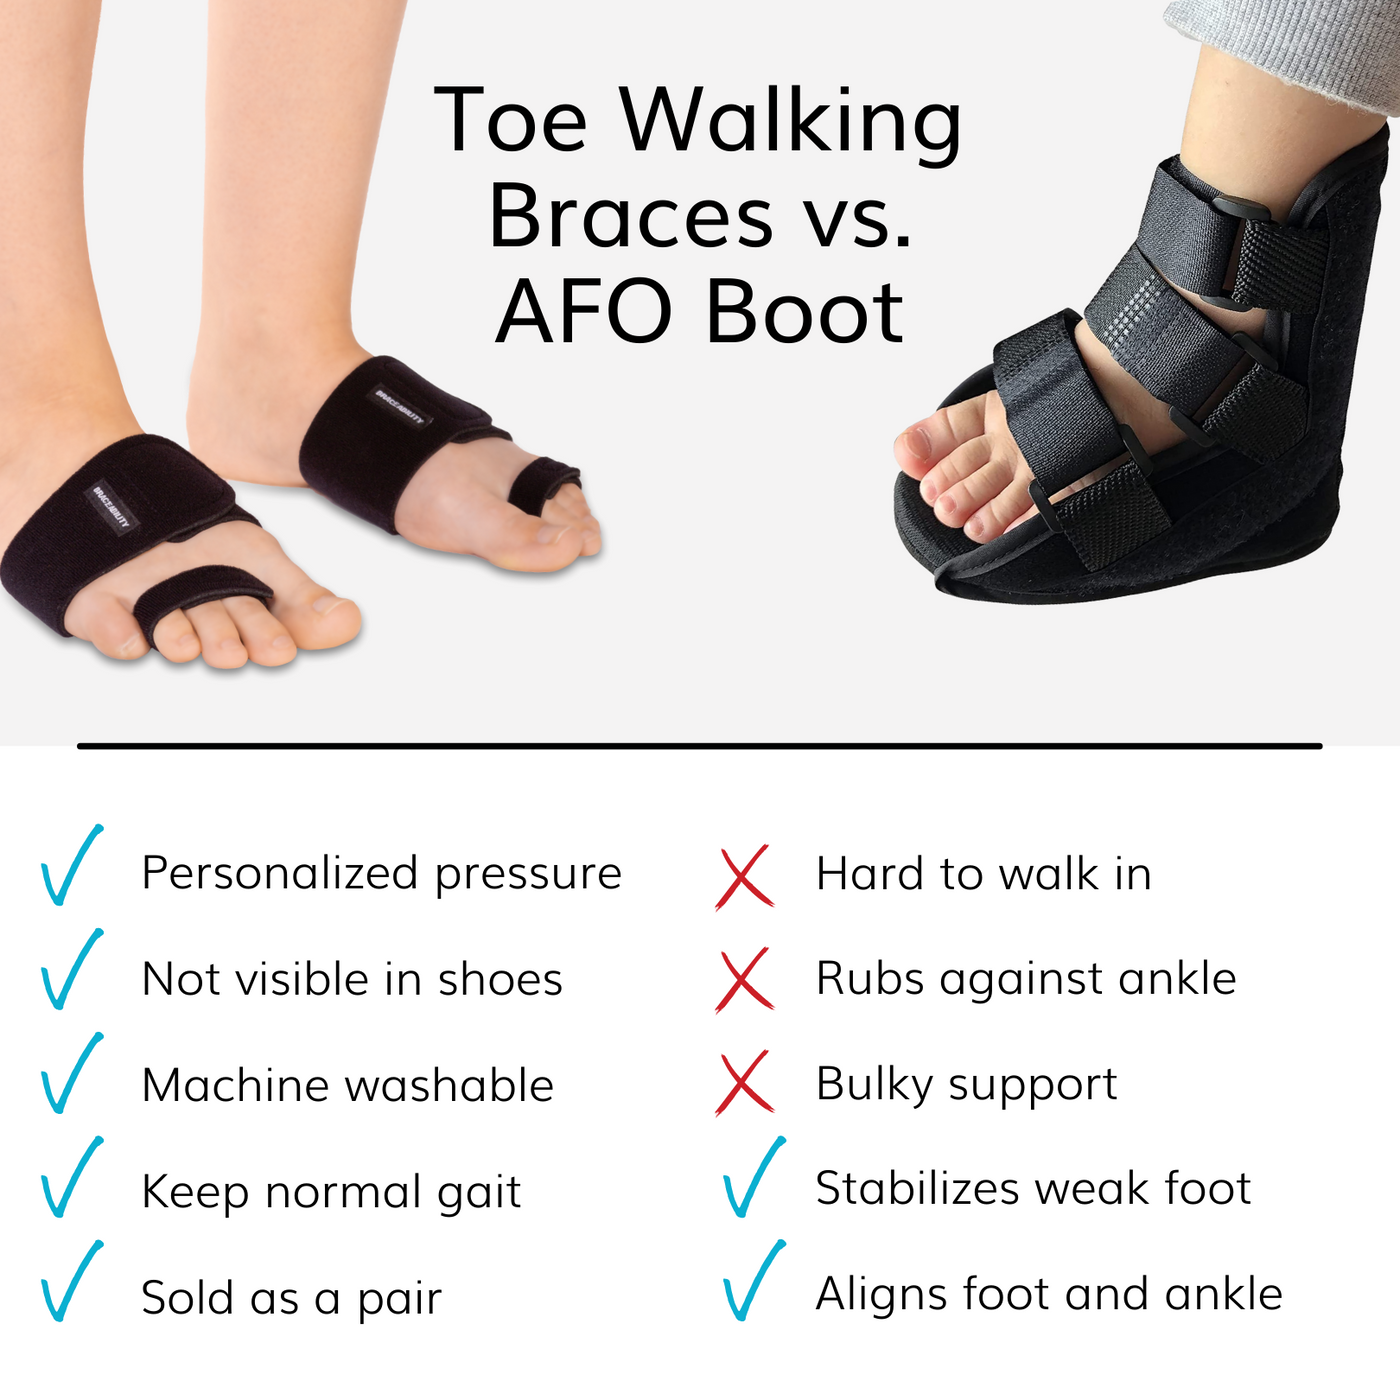 When comparing our toe walking brace to an AFO boot for toe walking you gain customized support, hidden correction, and a comfortable gait